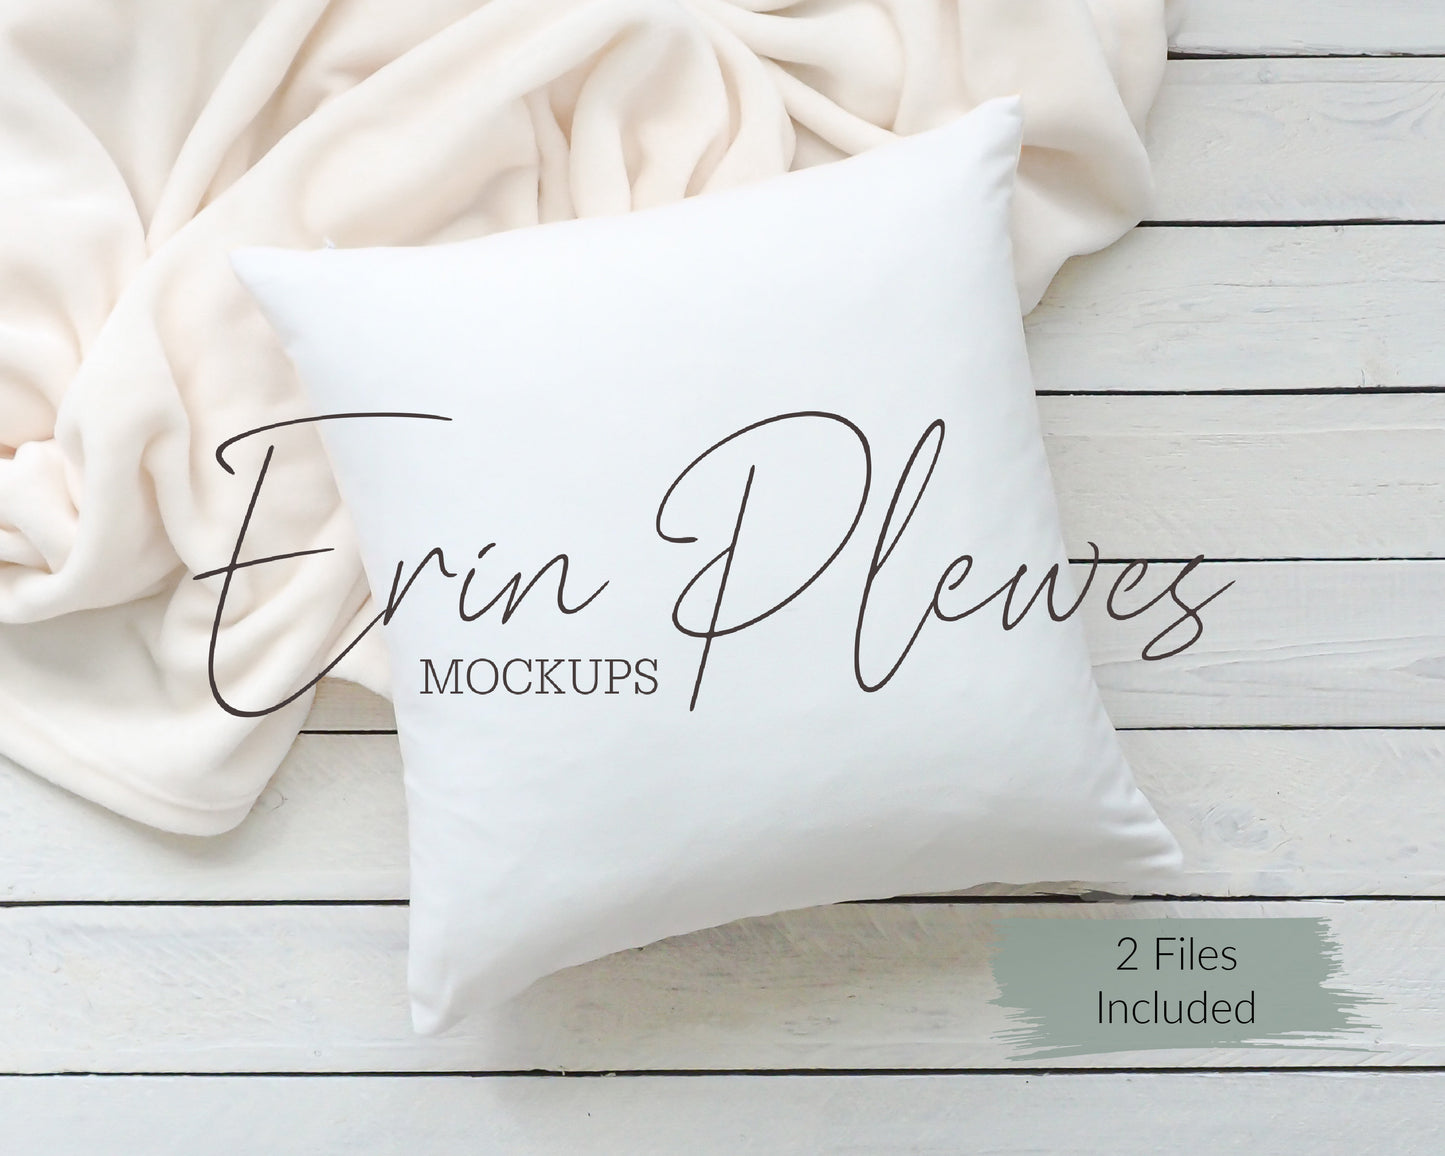 White Pillow Mockup, Pillow case mock-up with white blanket, Minimalist cushion lifestyle stock photograph, Jpeg Instant Digital Download